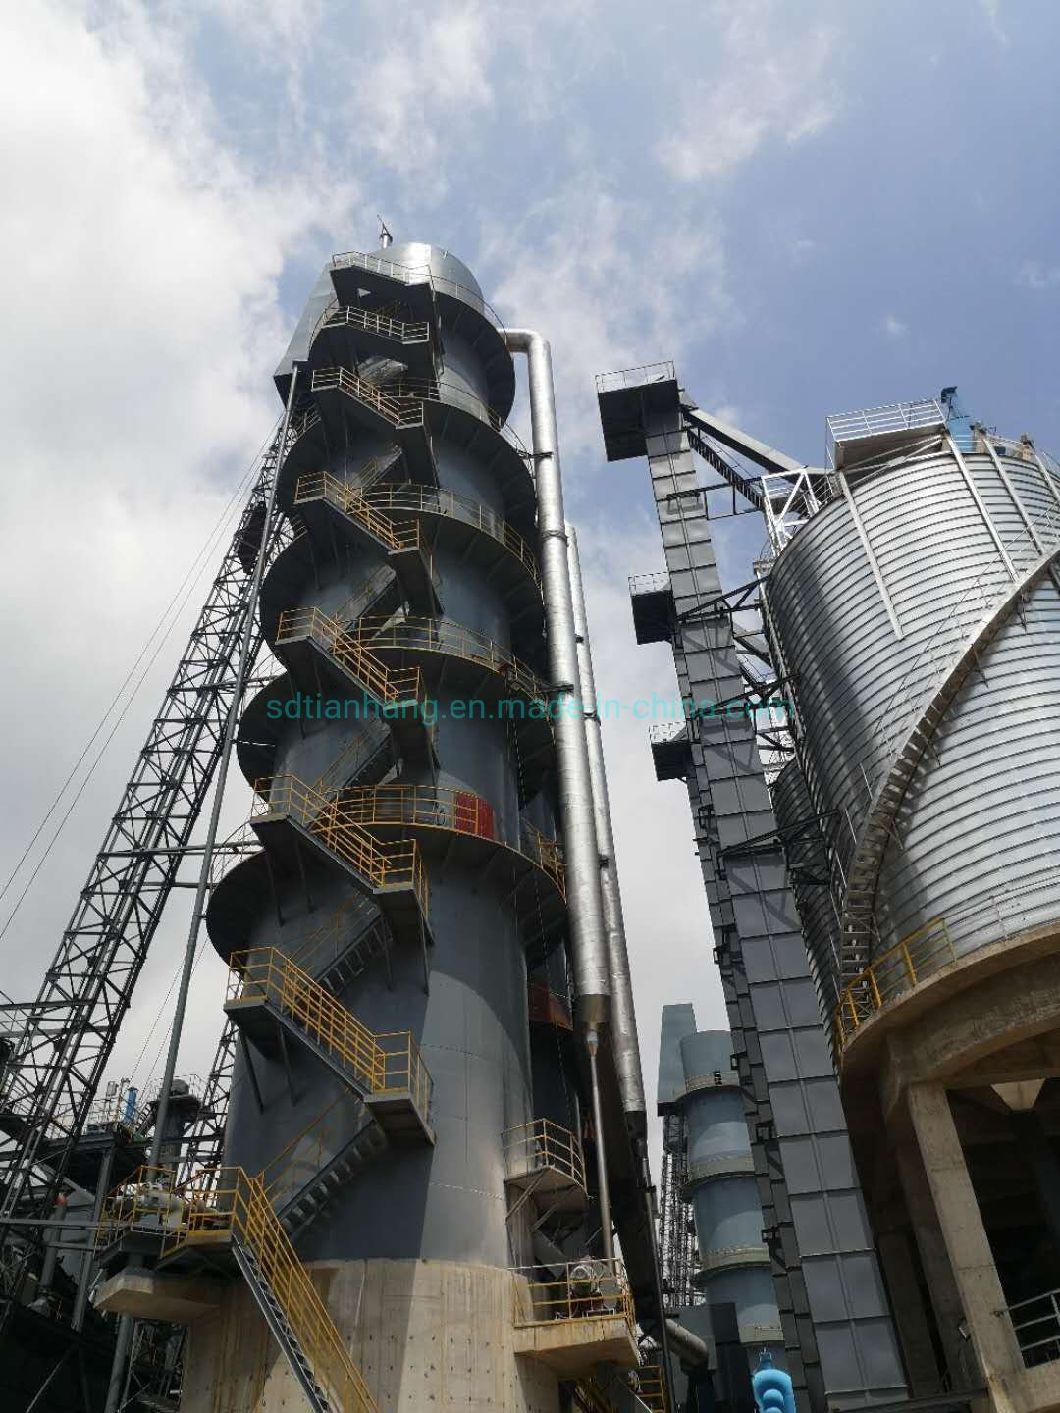 China Vertical Shaft Kiln Hydrated Lime Plant Manufacturers Kiln